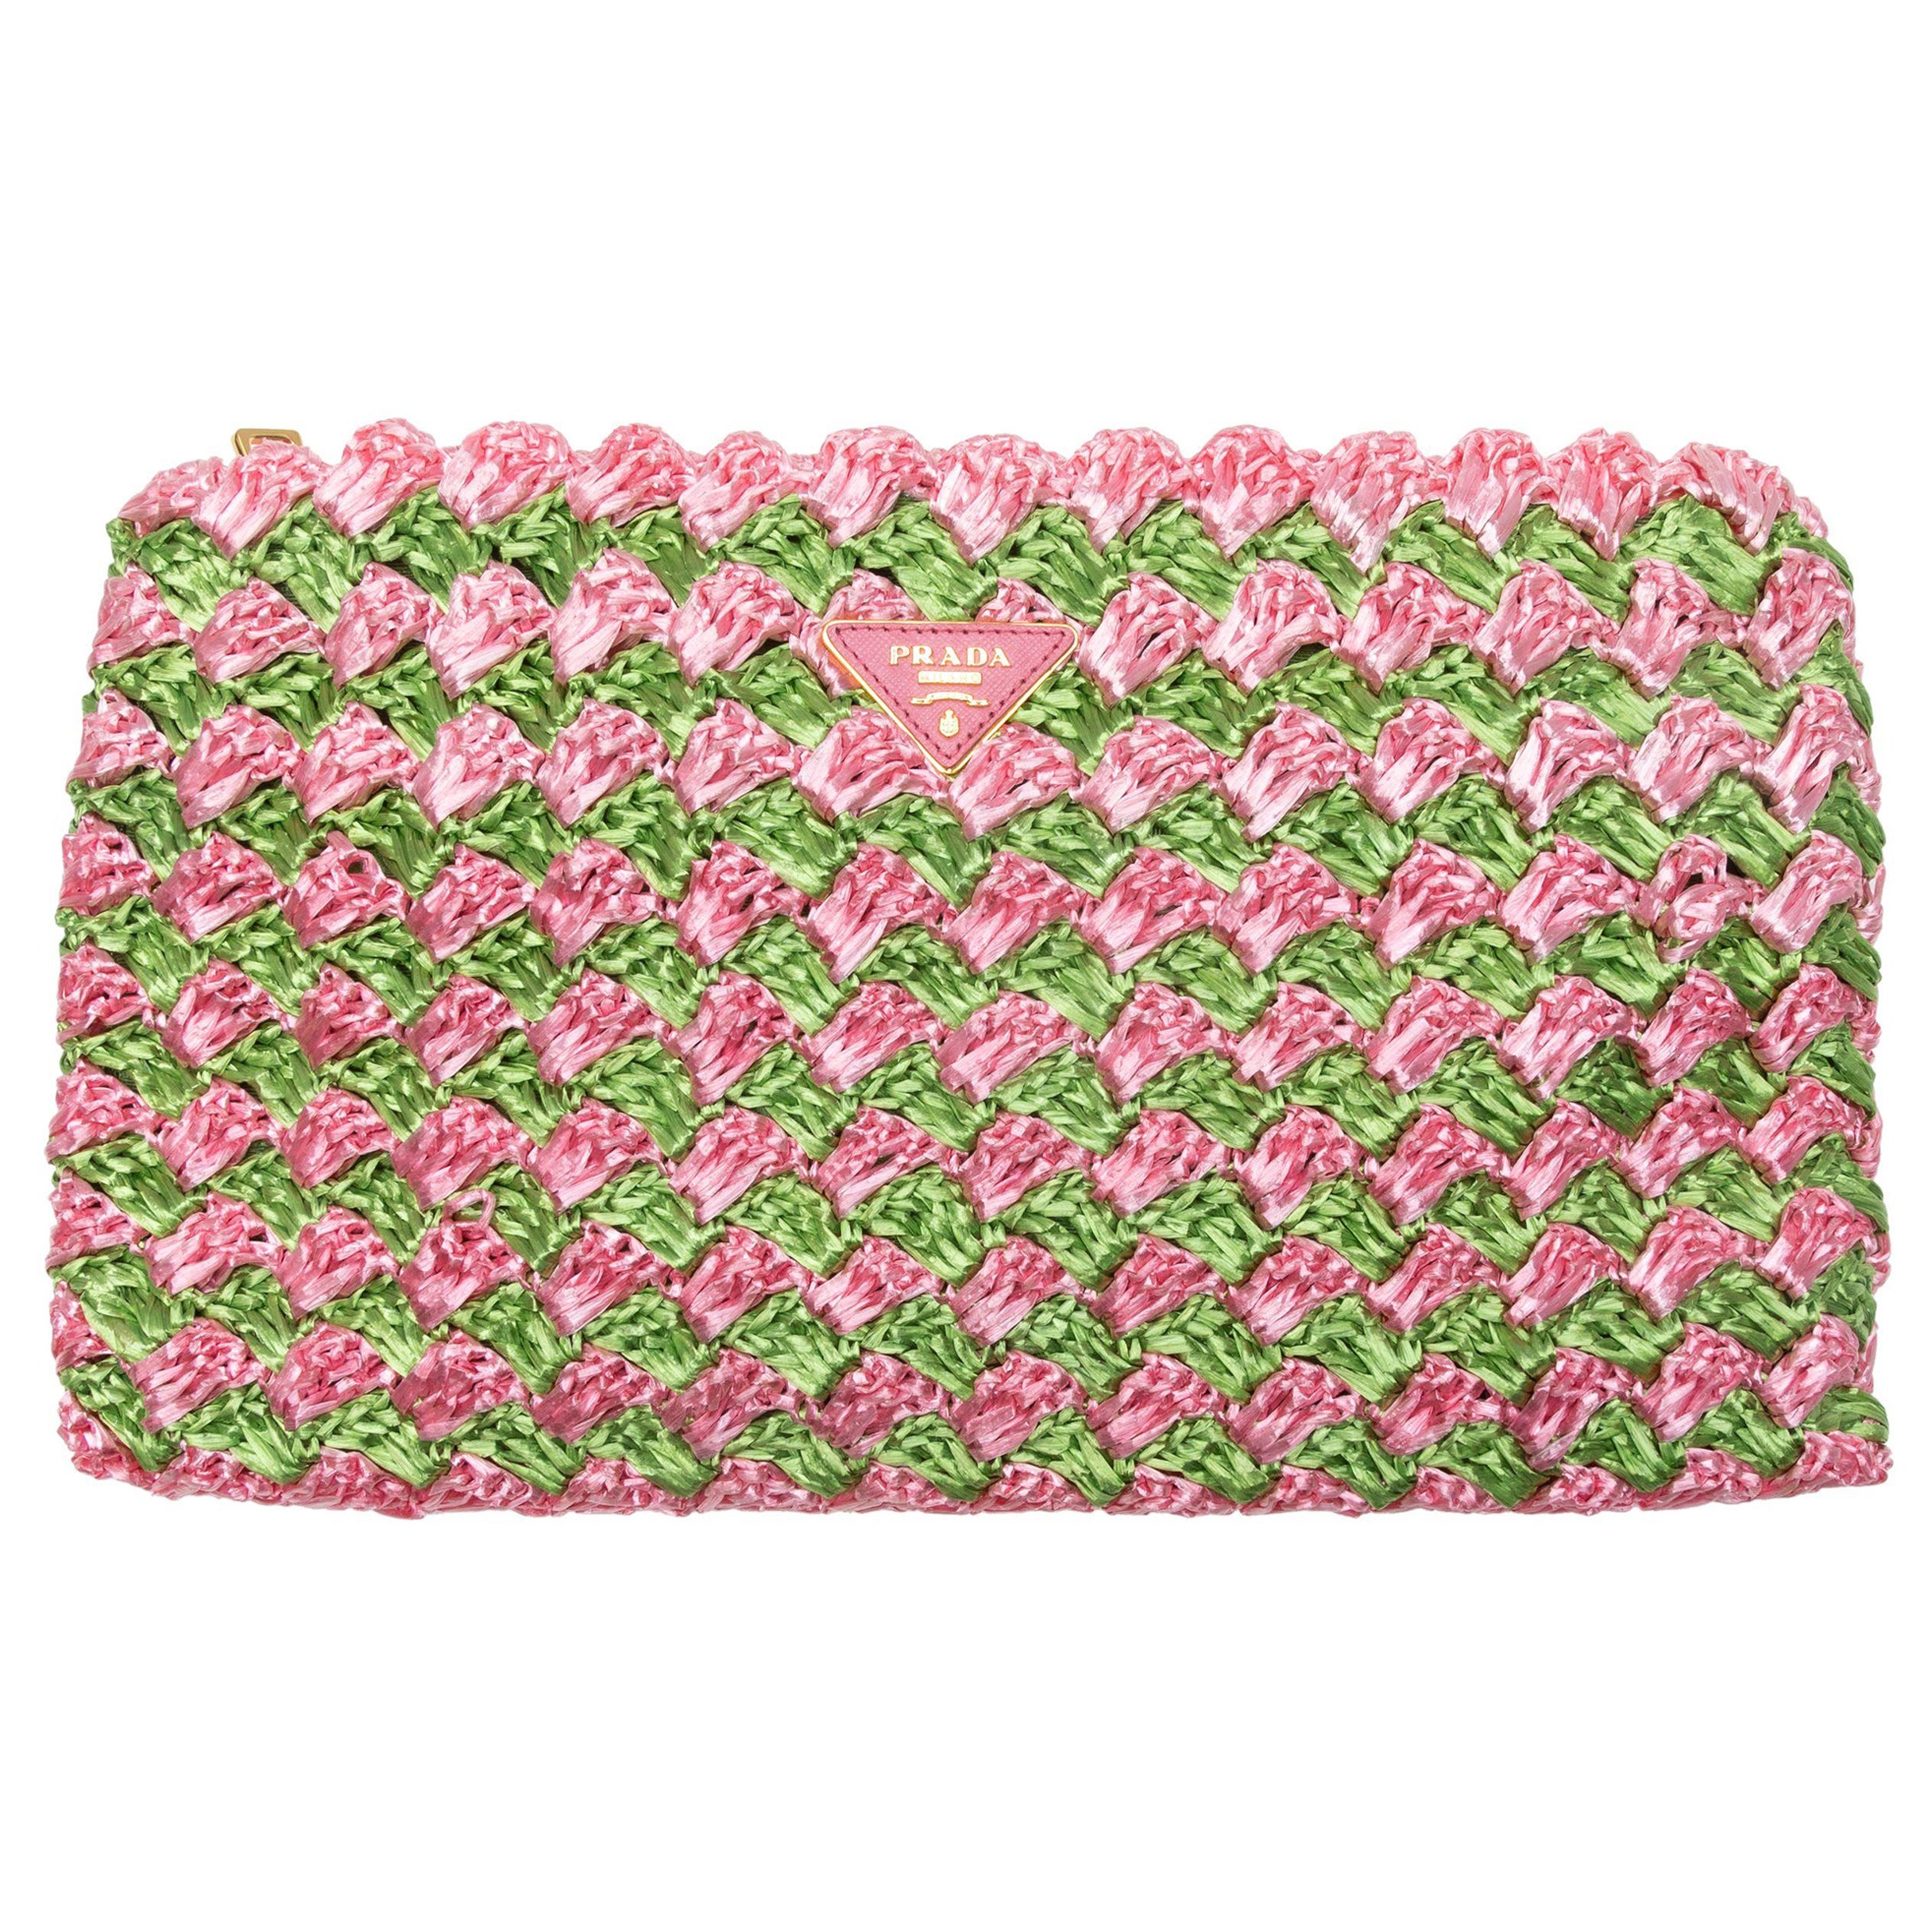 Prada neon-pink large nylon clutch large For Sale at 1stDibs